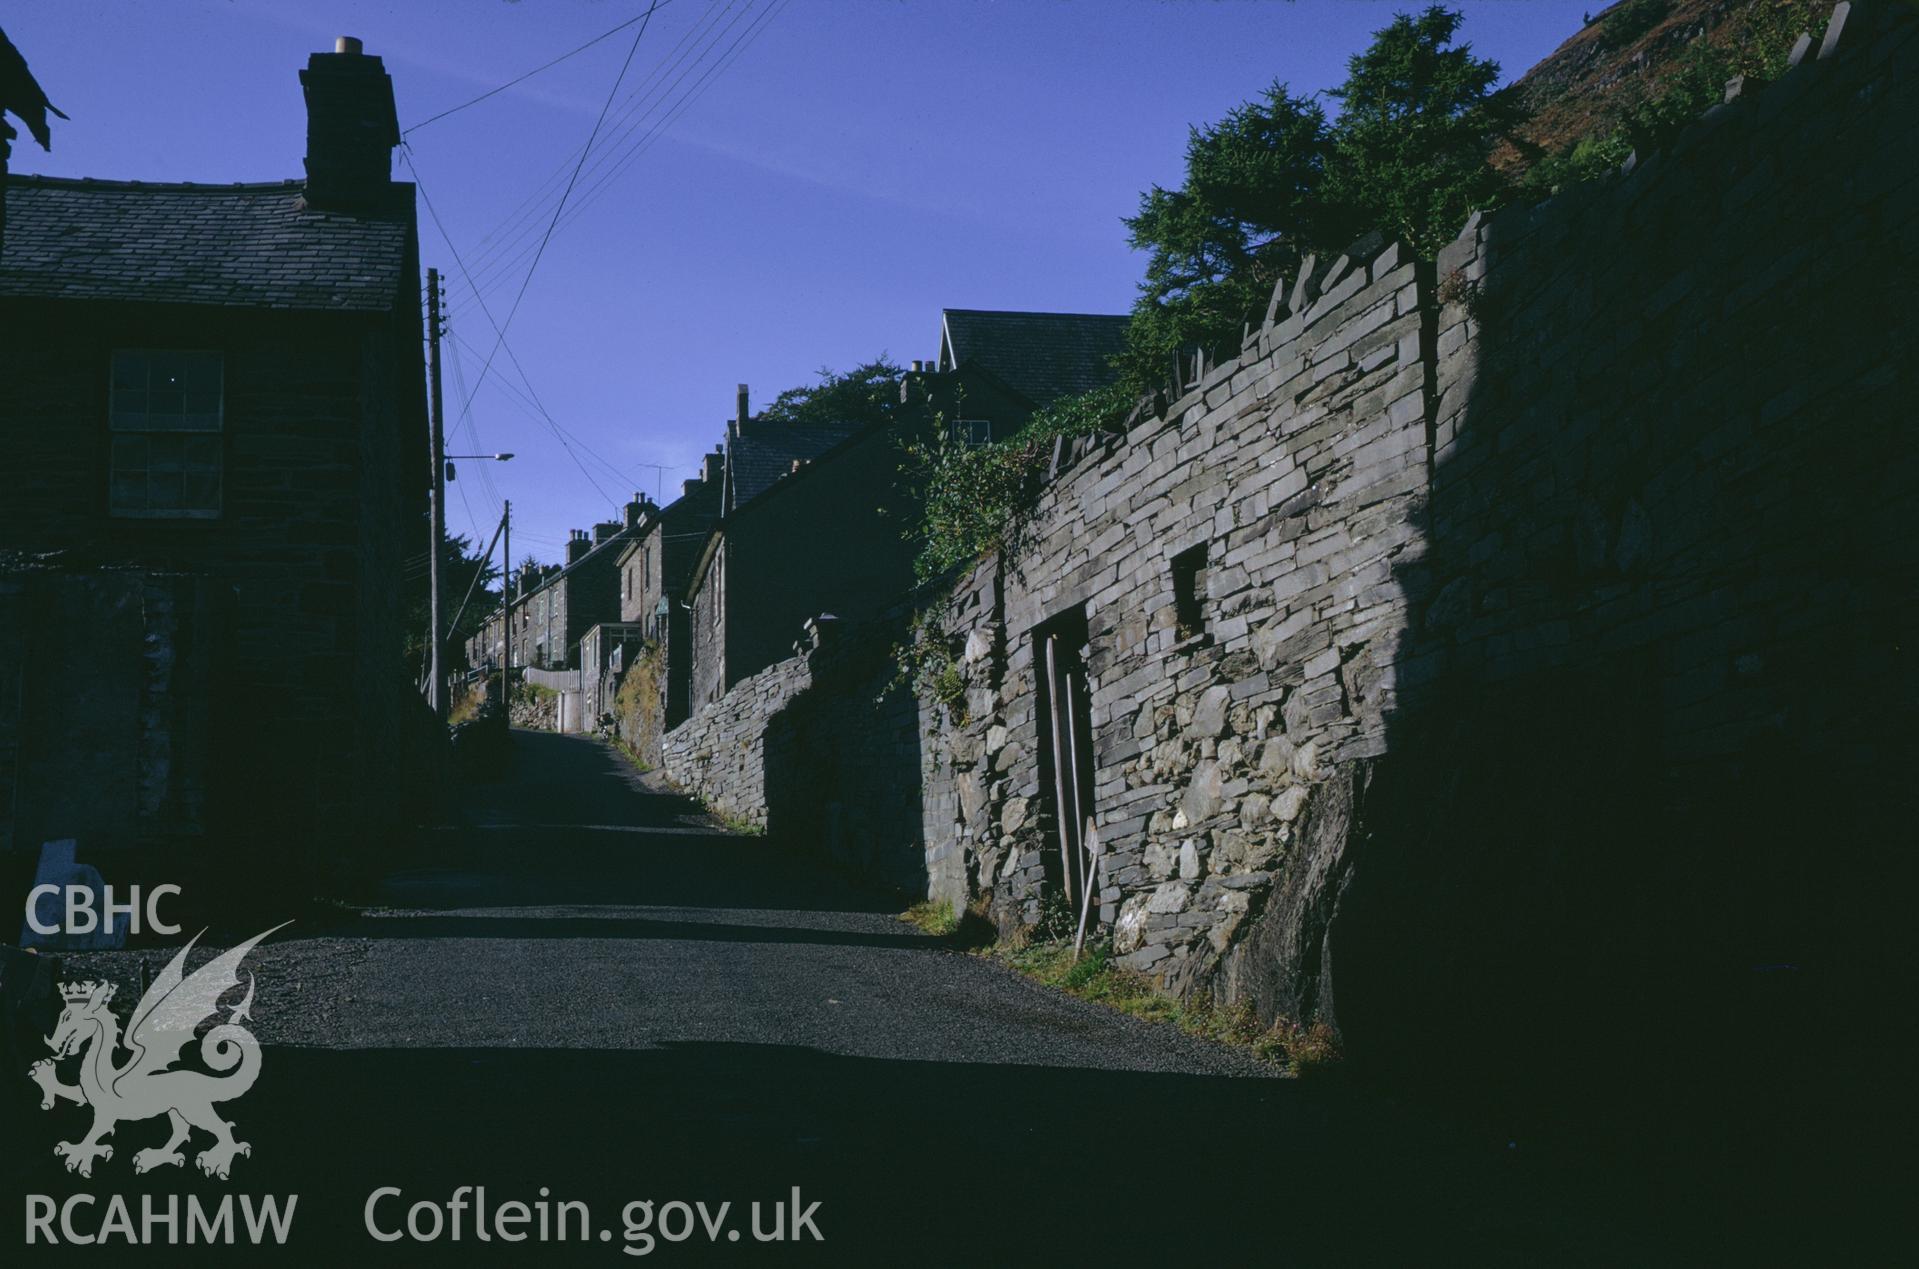 35mm colour slide showing workers houses in Corris, Merionethshire by Dylan Roberts.